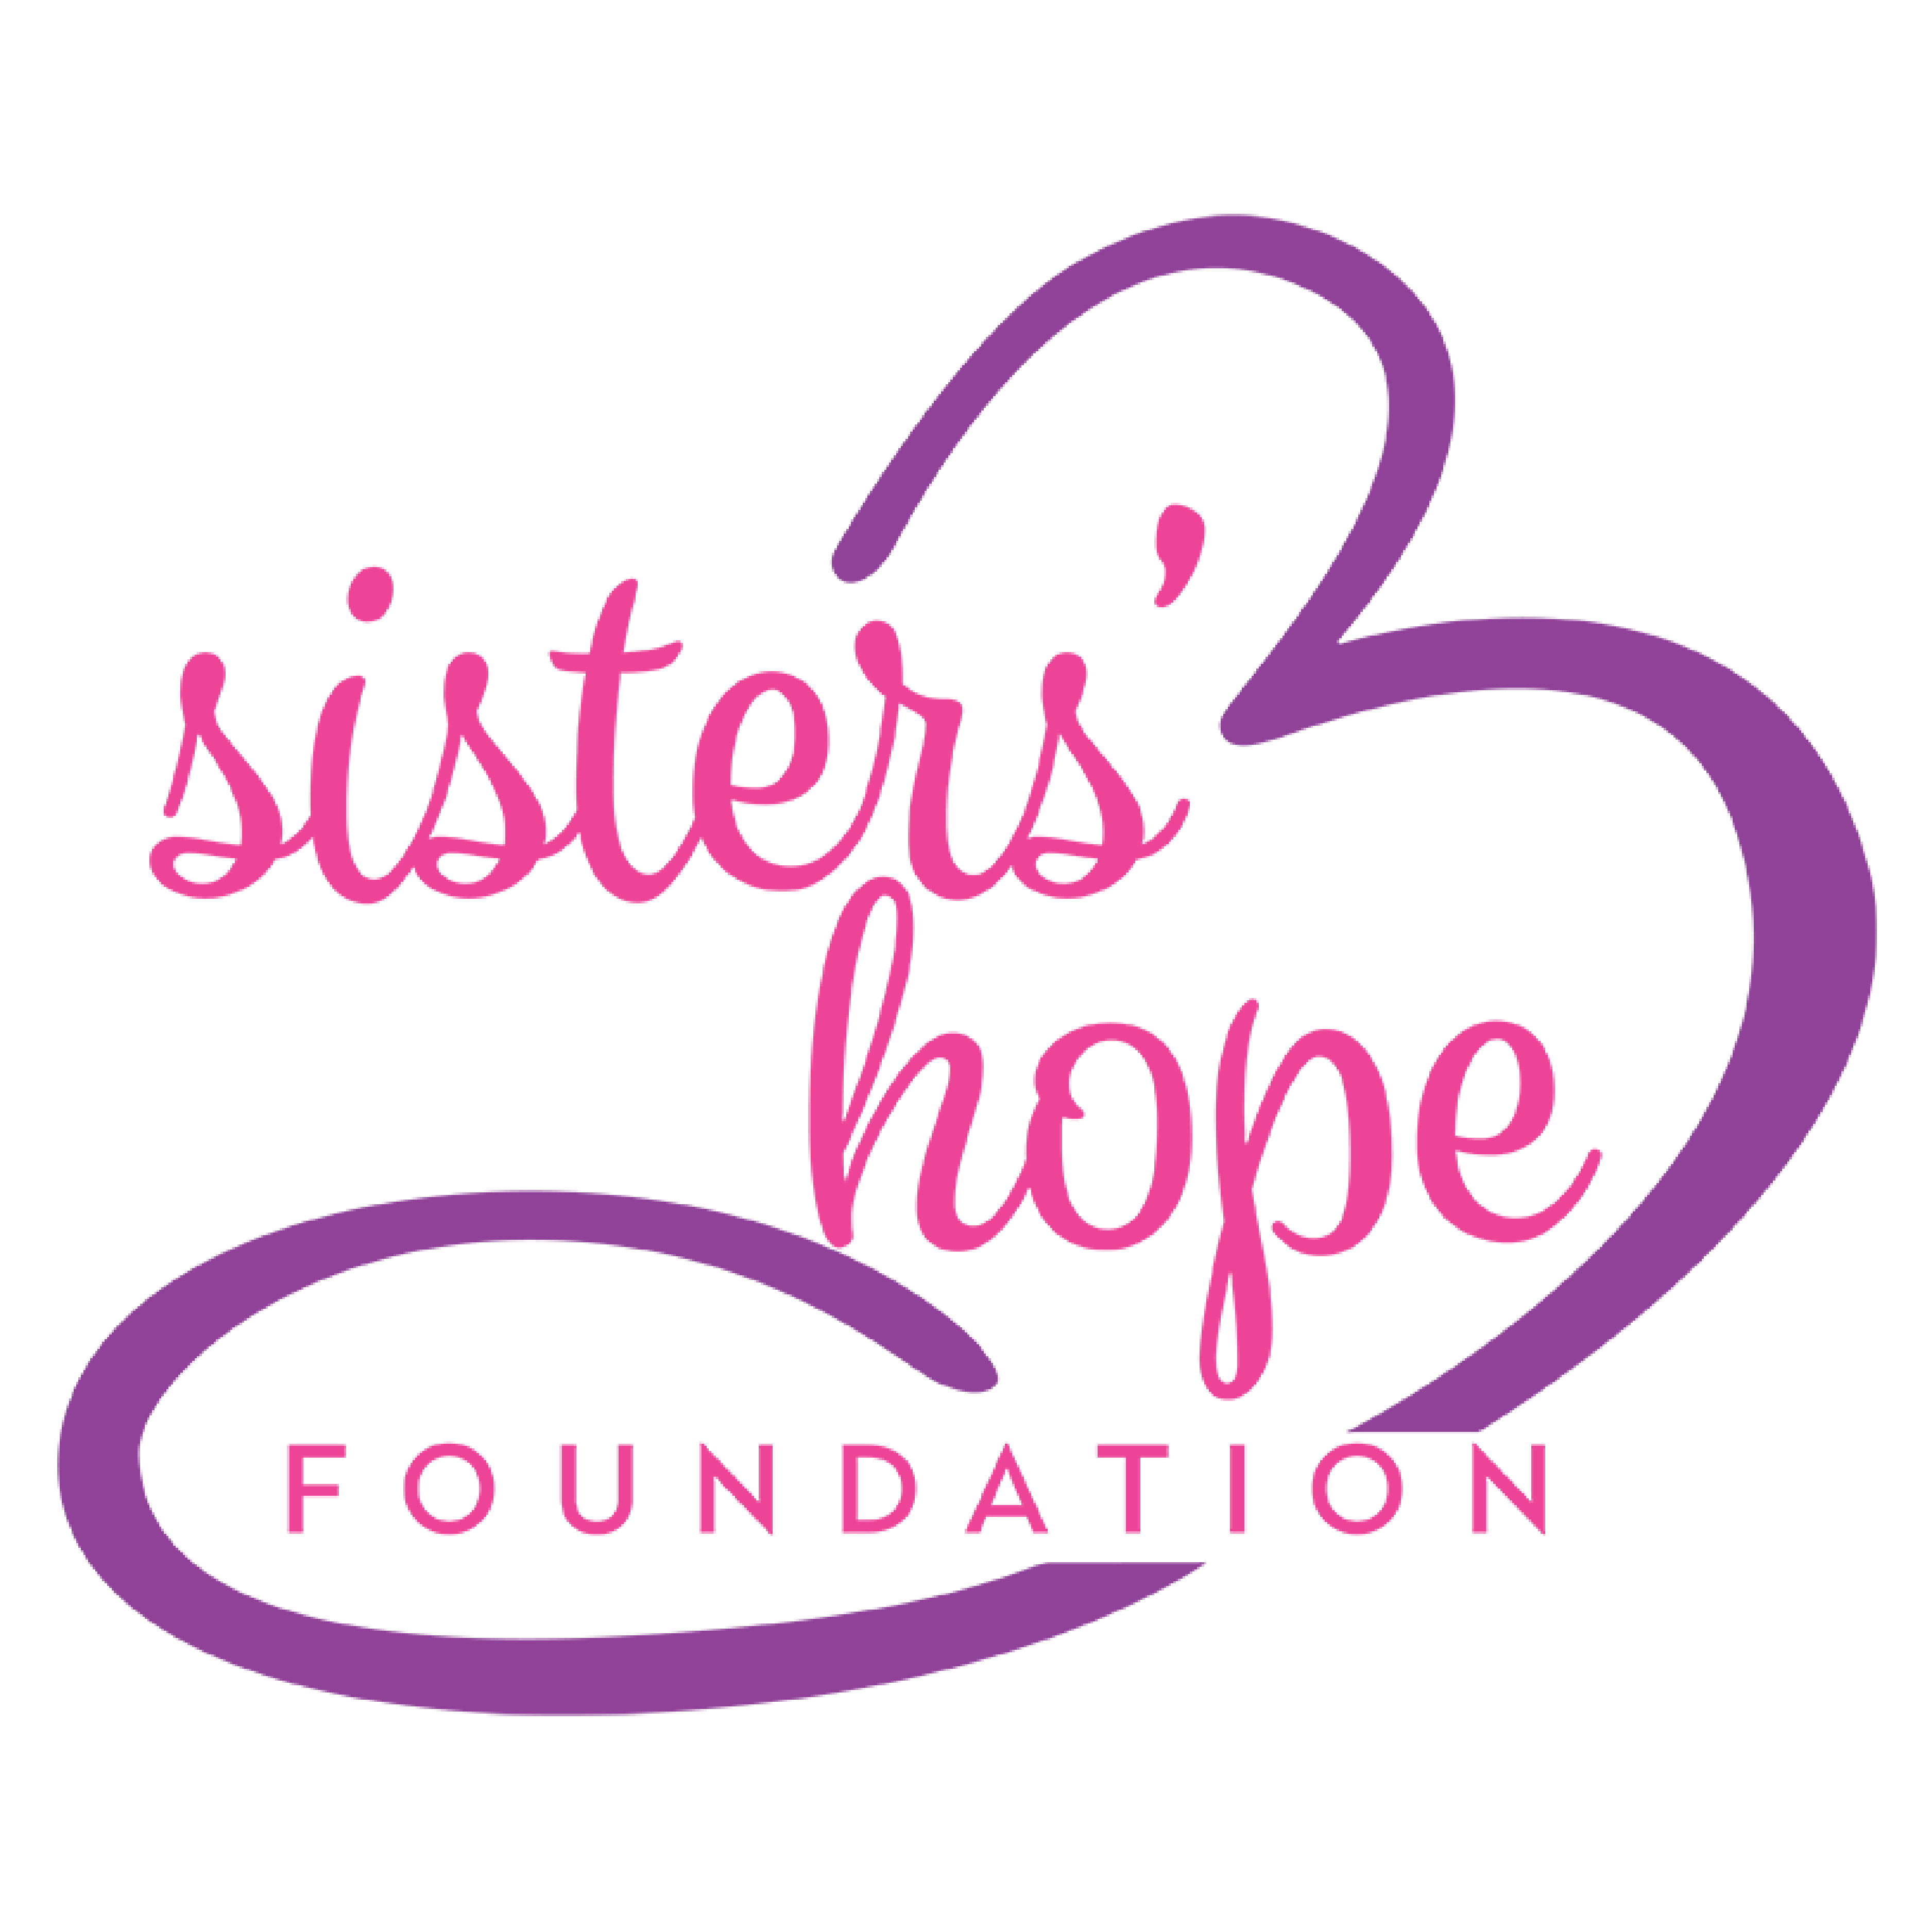 Sisters' Hope Foundation